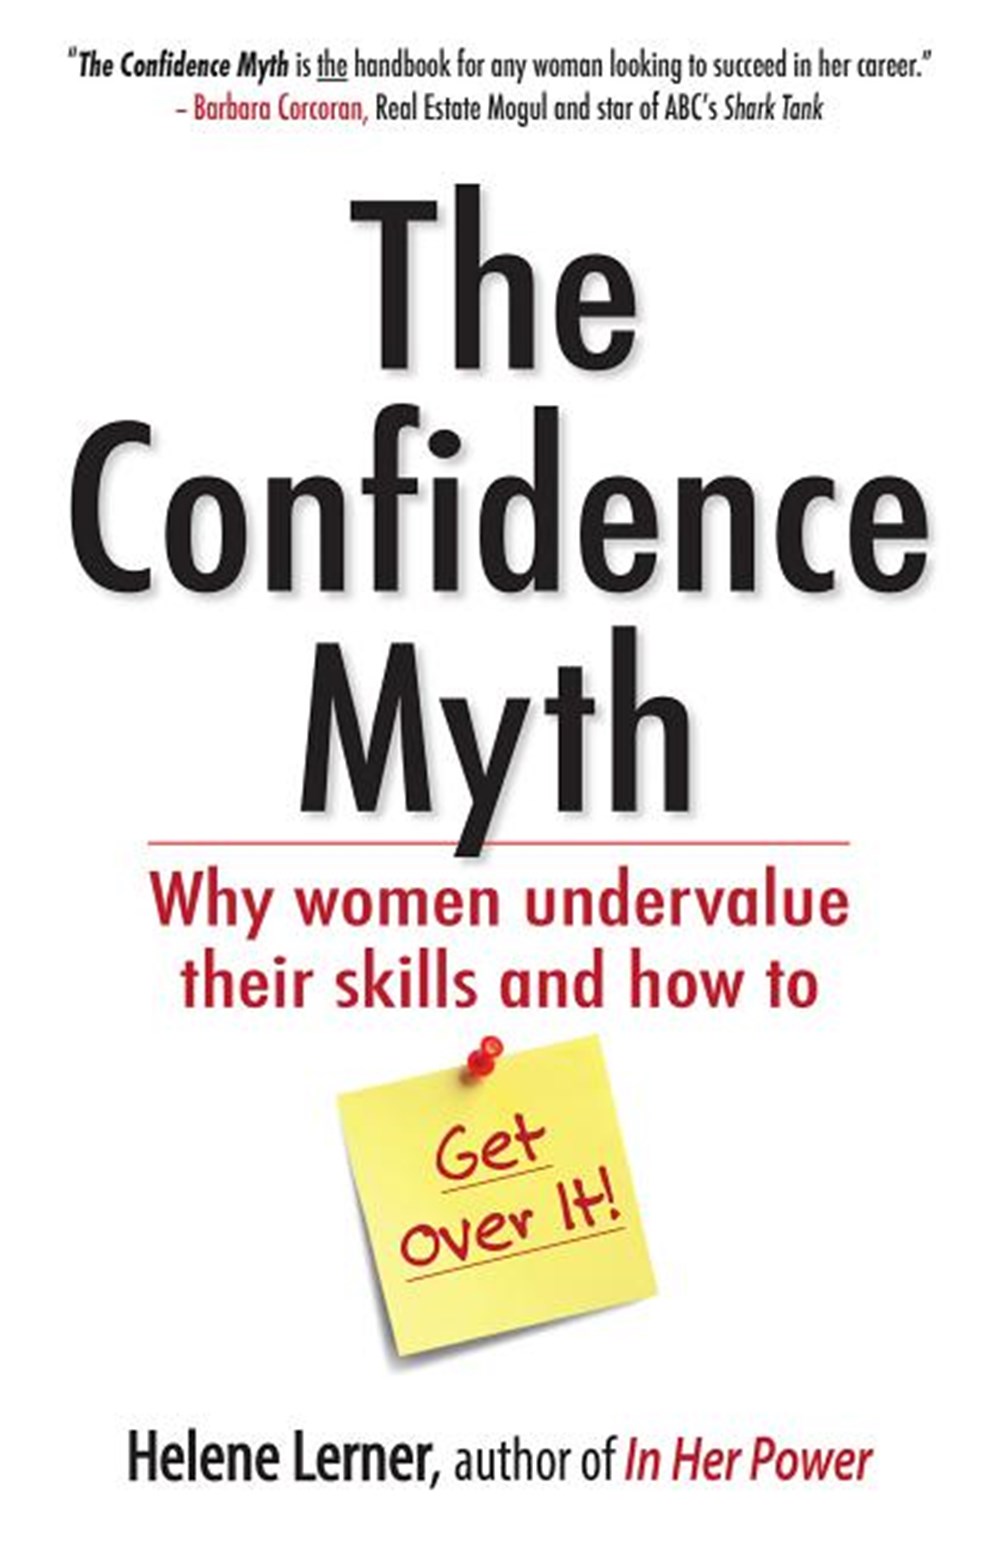 Confidence Myth Why Women Undervalue Their Skills, and How to Get Over It